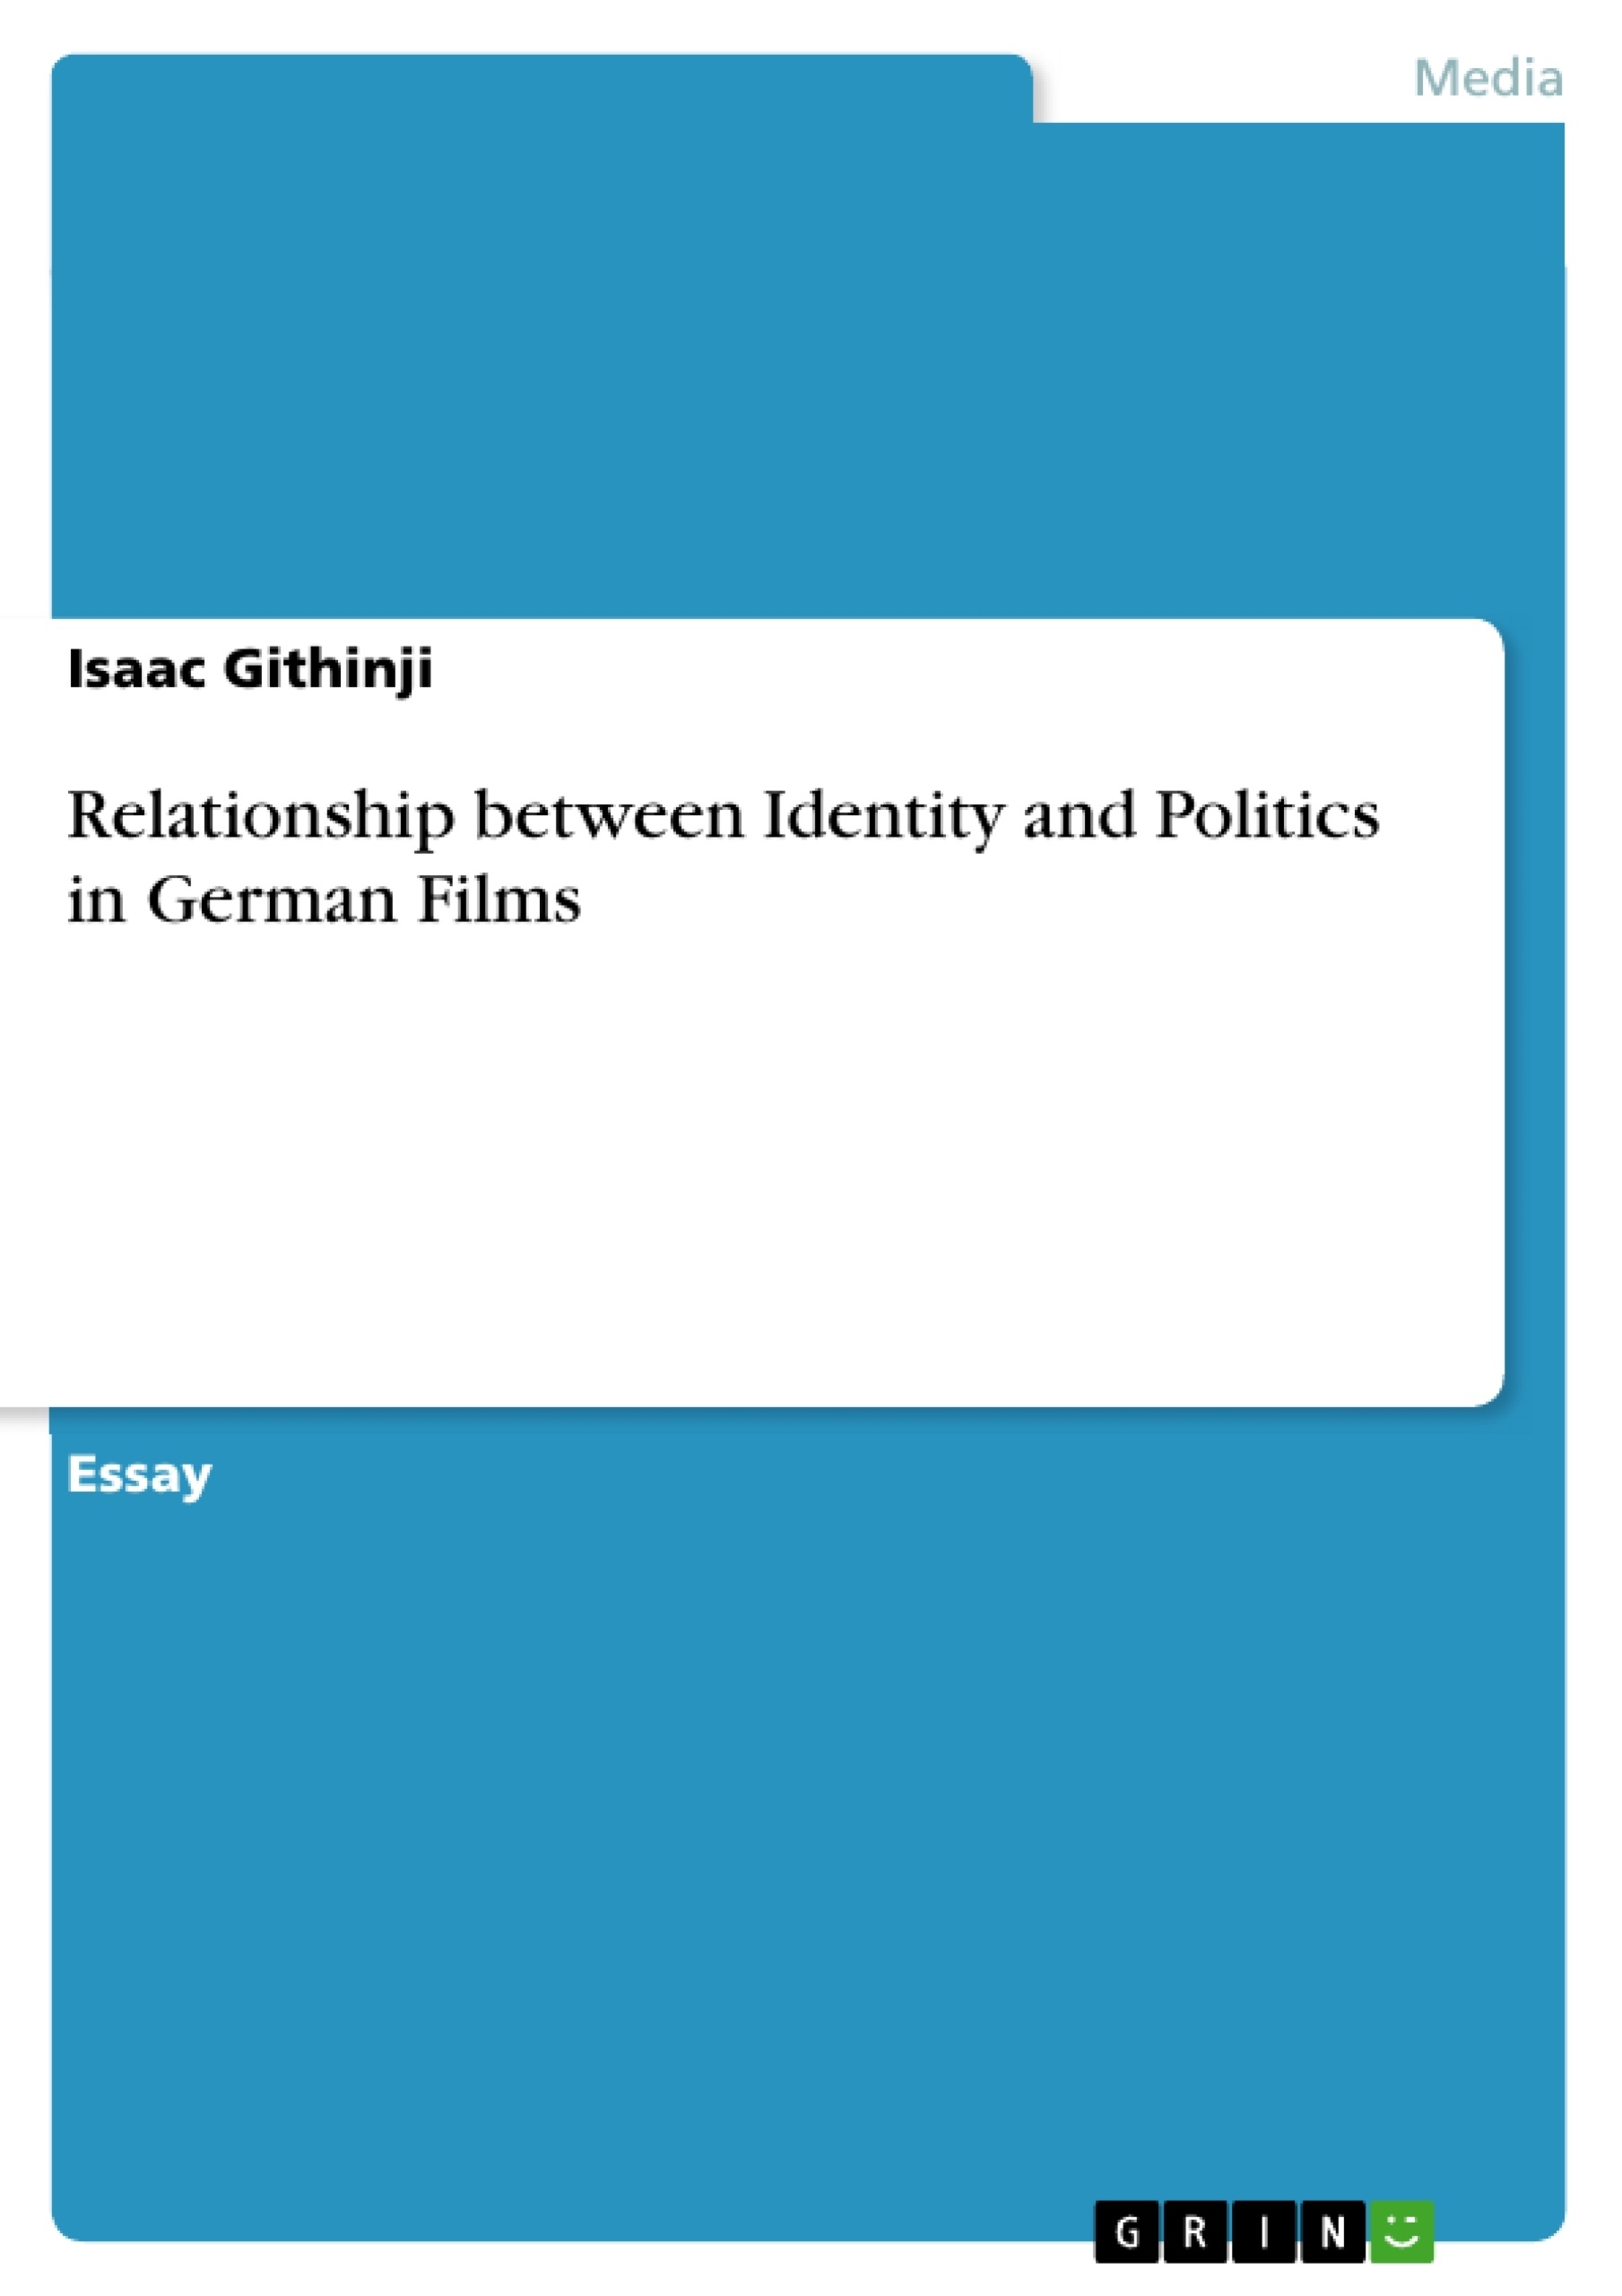 Title: Relationship between Identity and Politics in German Films